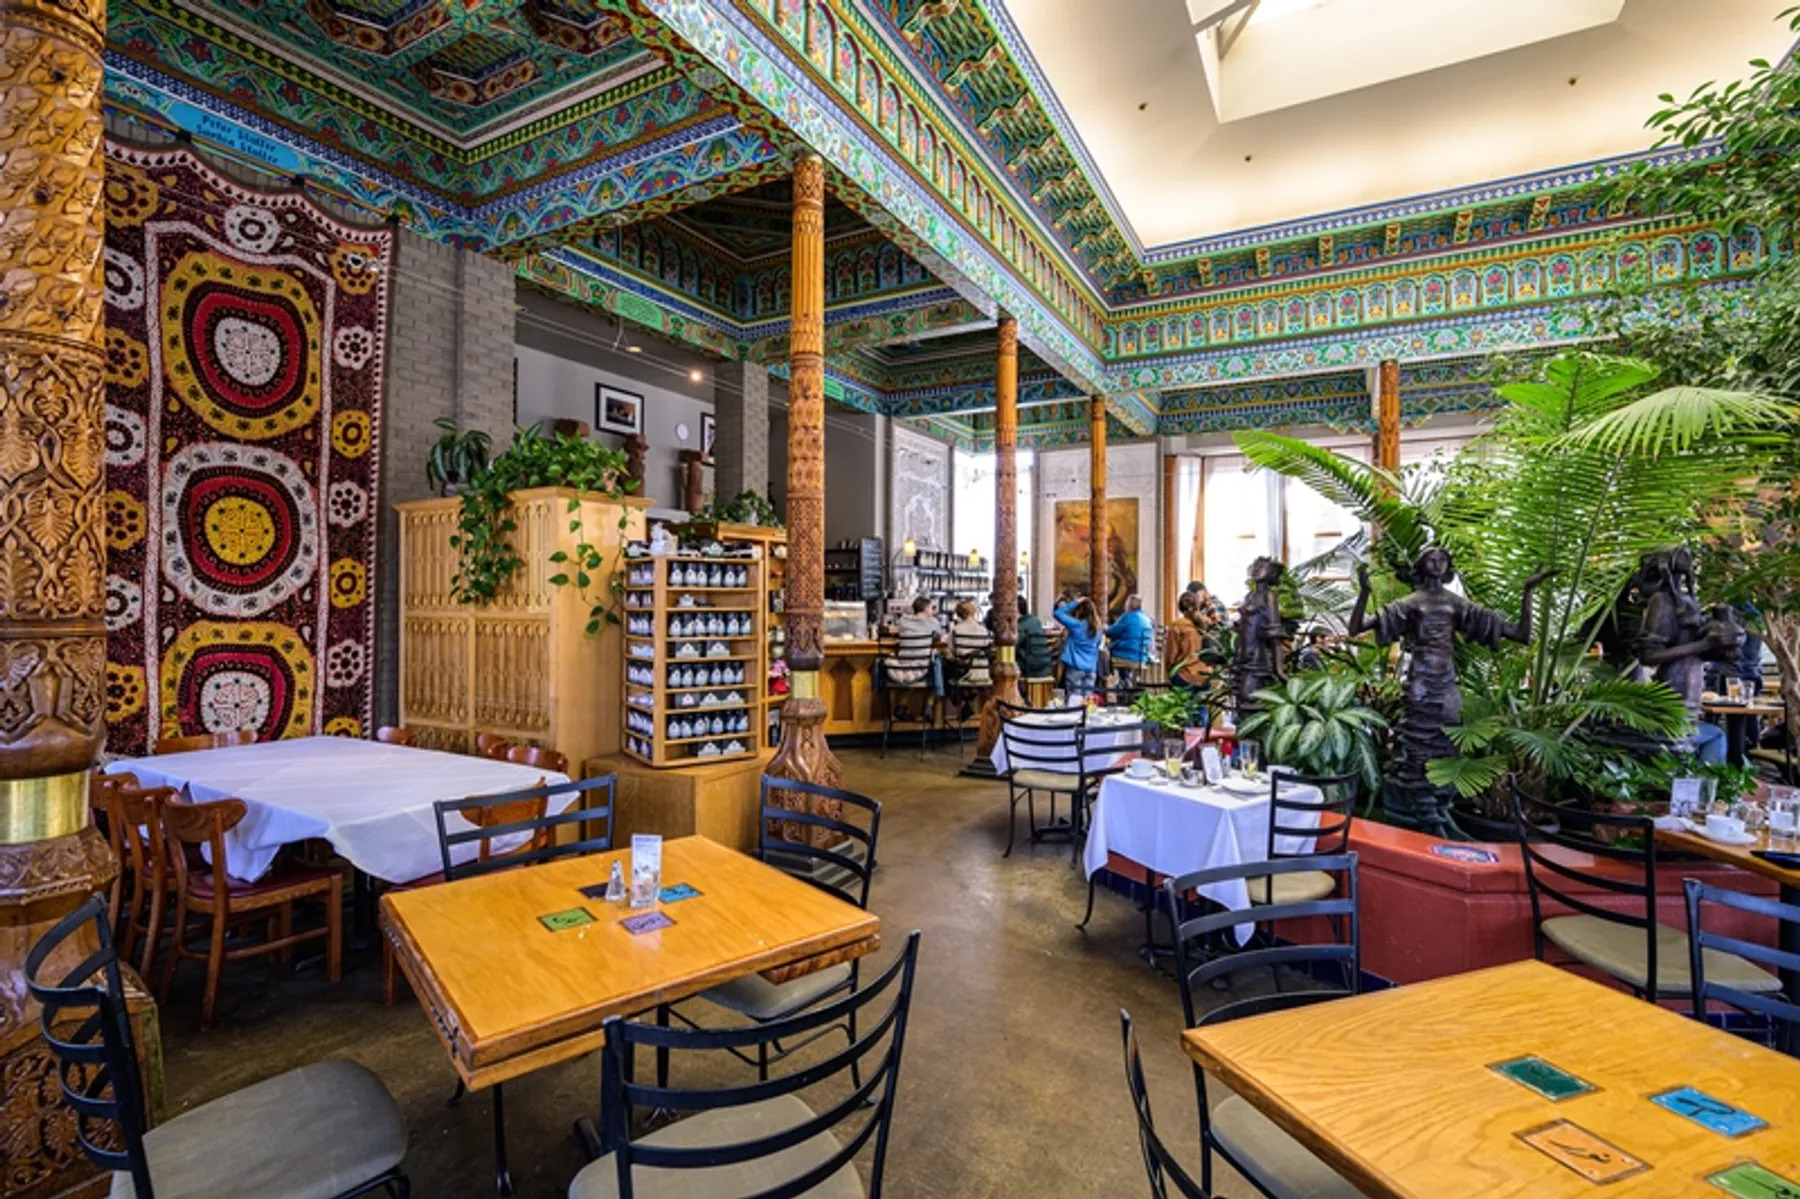 The Boulder Dushanbe Teahouse in Boulder